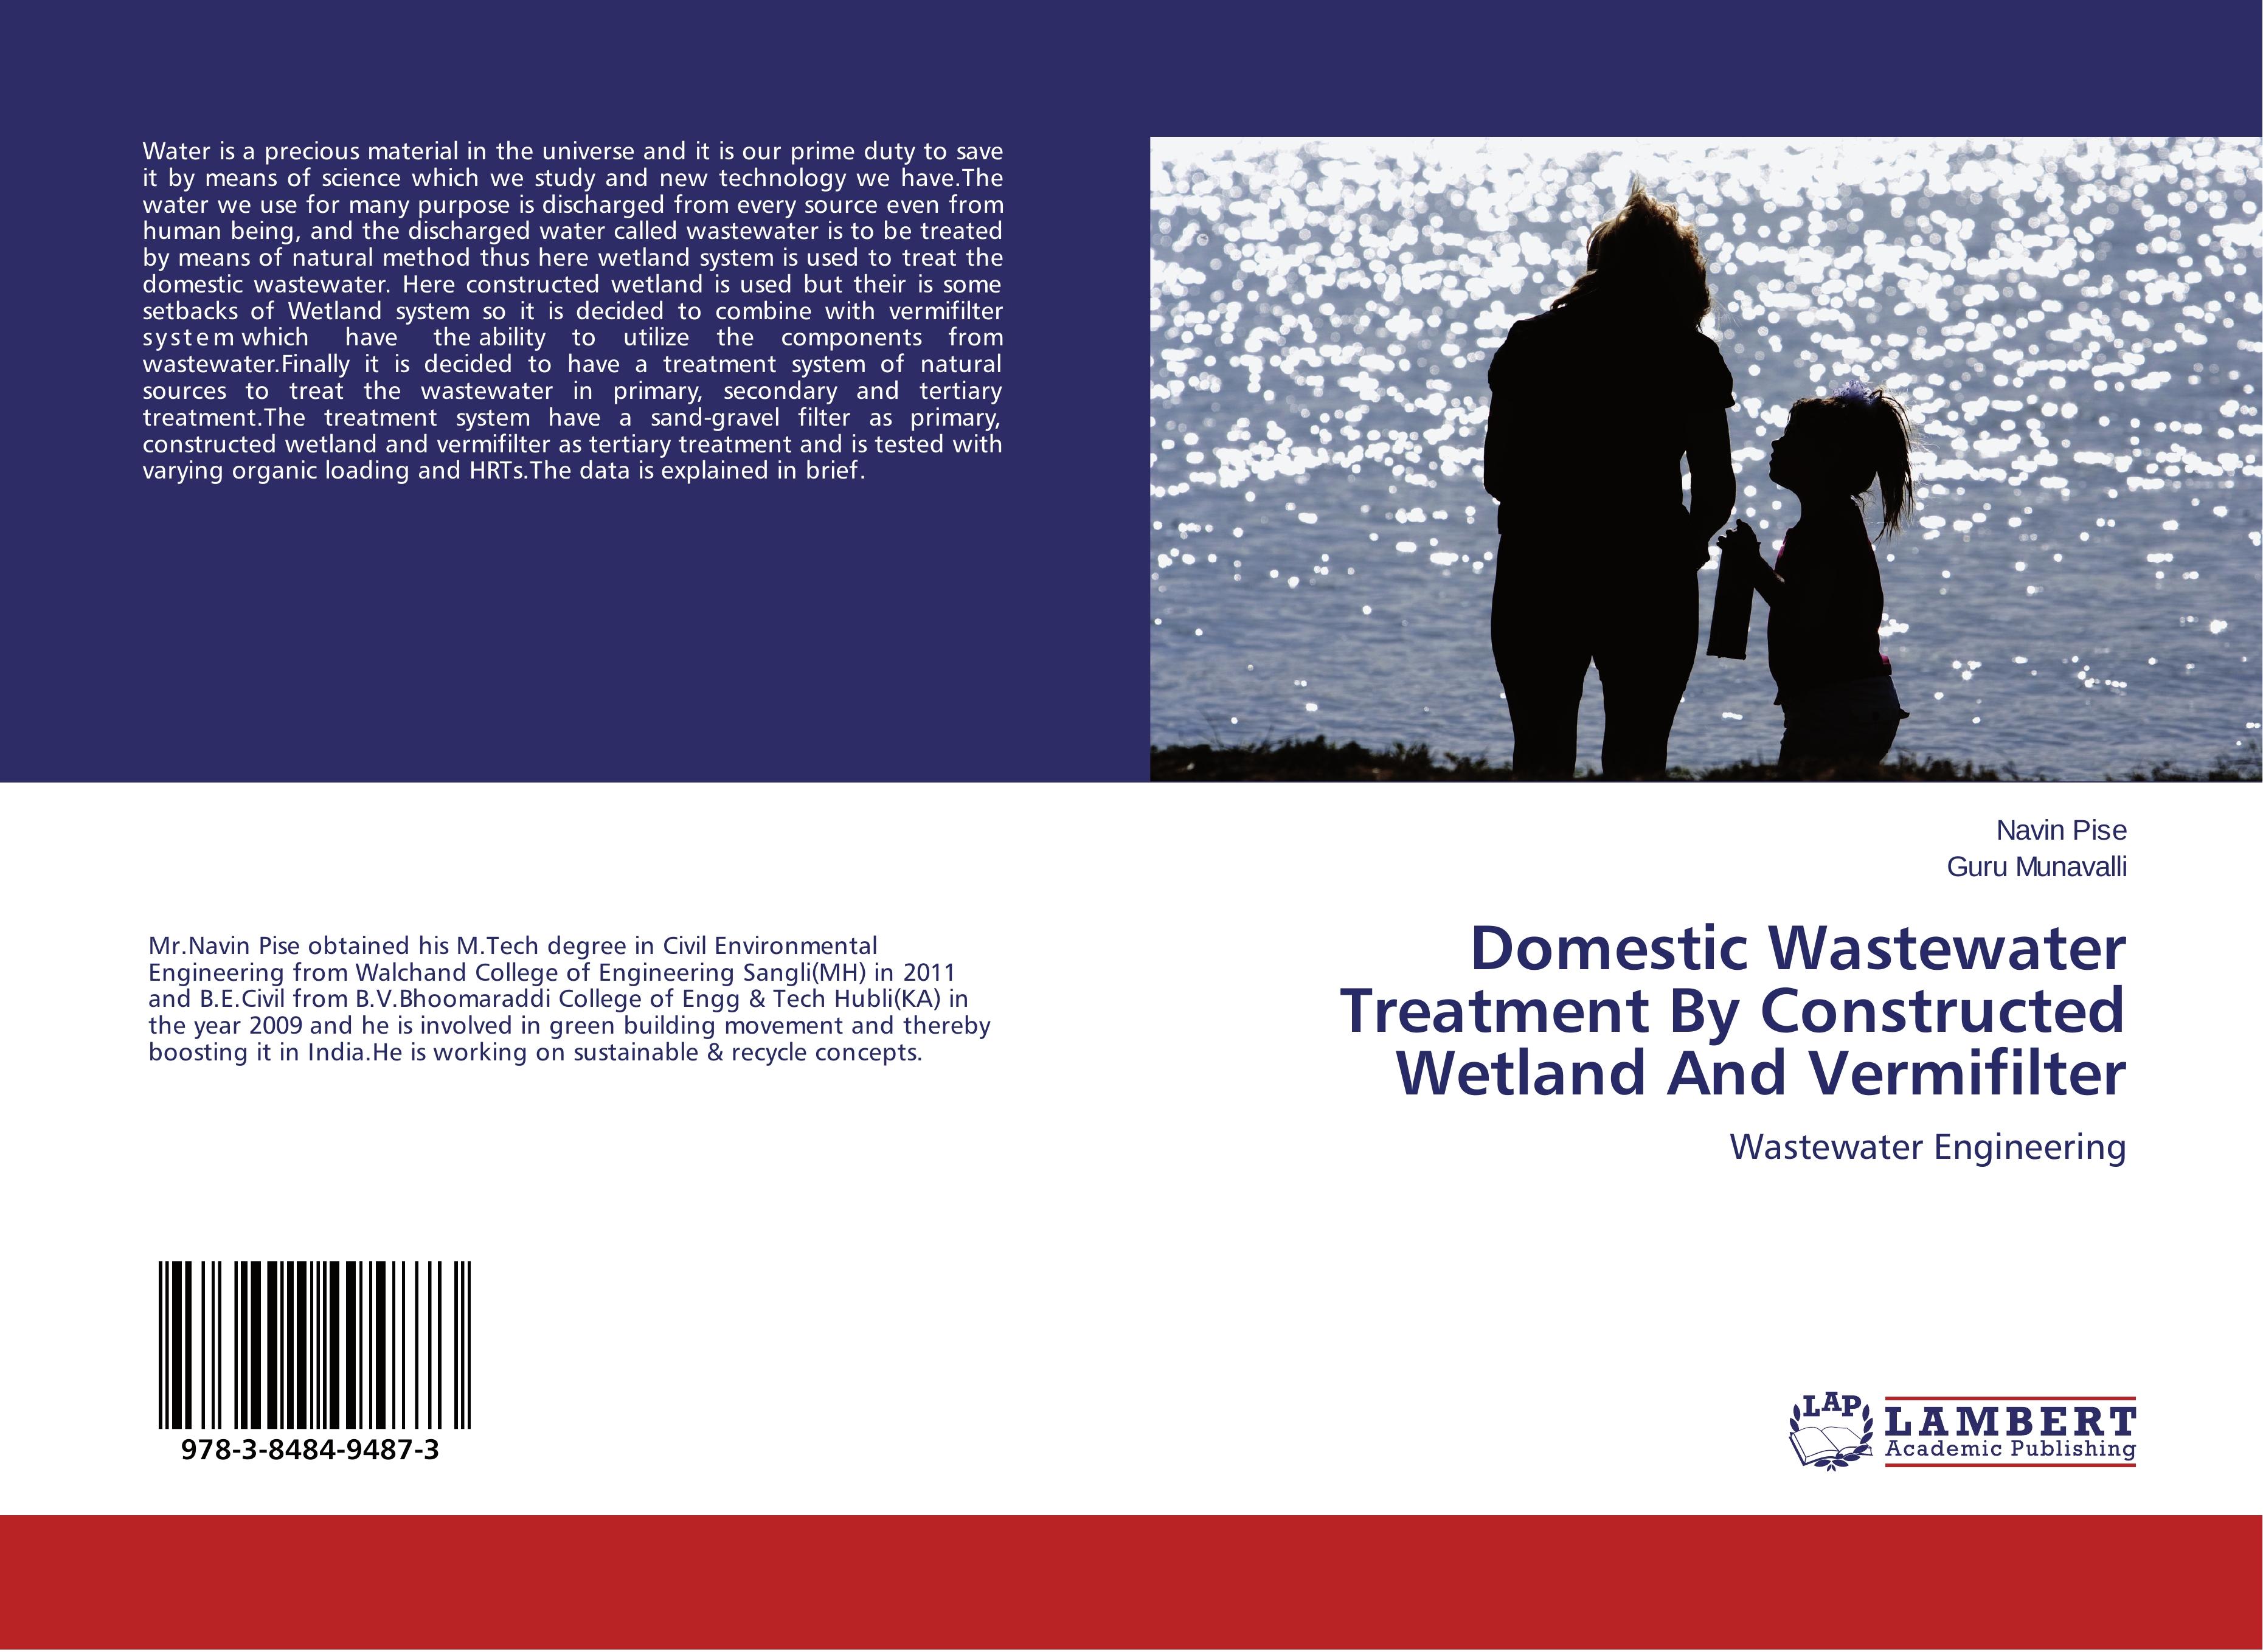 Domestic Wastewater Treatment By Constructed Wetland And Vermifilter - Navin Pise Guru Munavalli